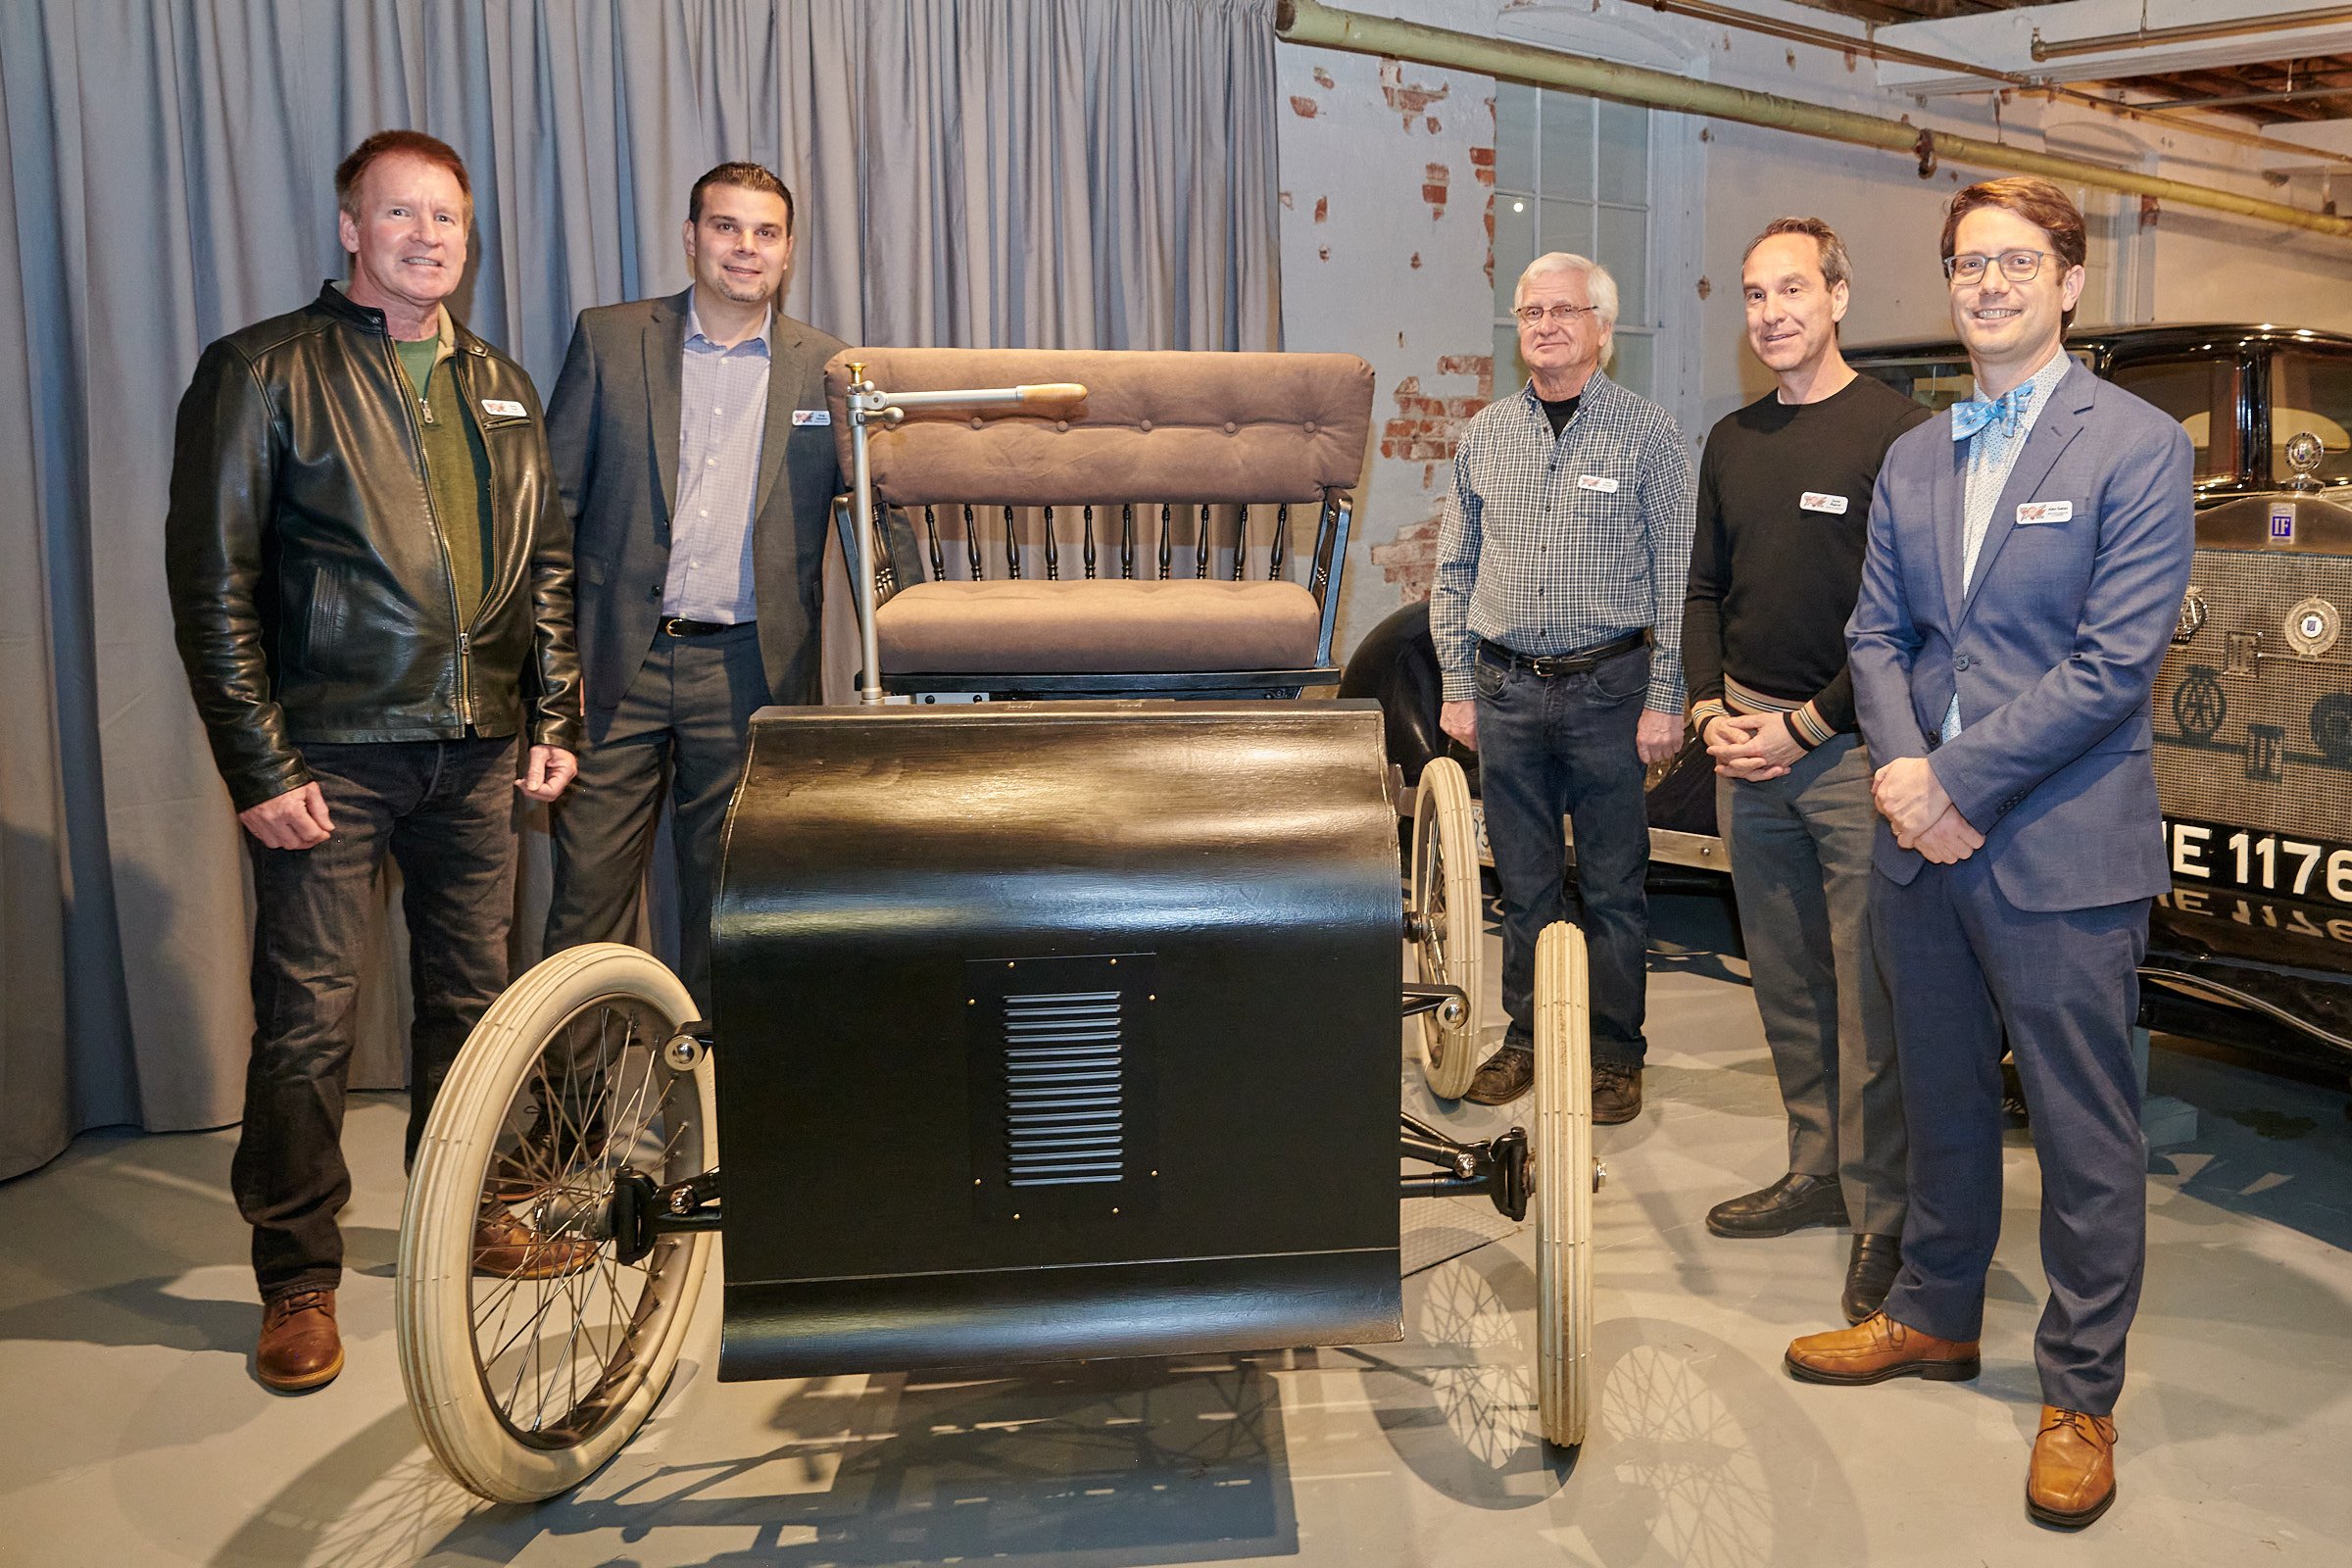  The CAM’s Board of Directors, and Executive Director Alex Gates, pose with the Fossmobile. 